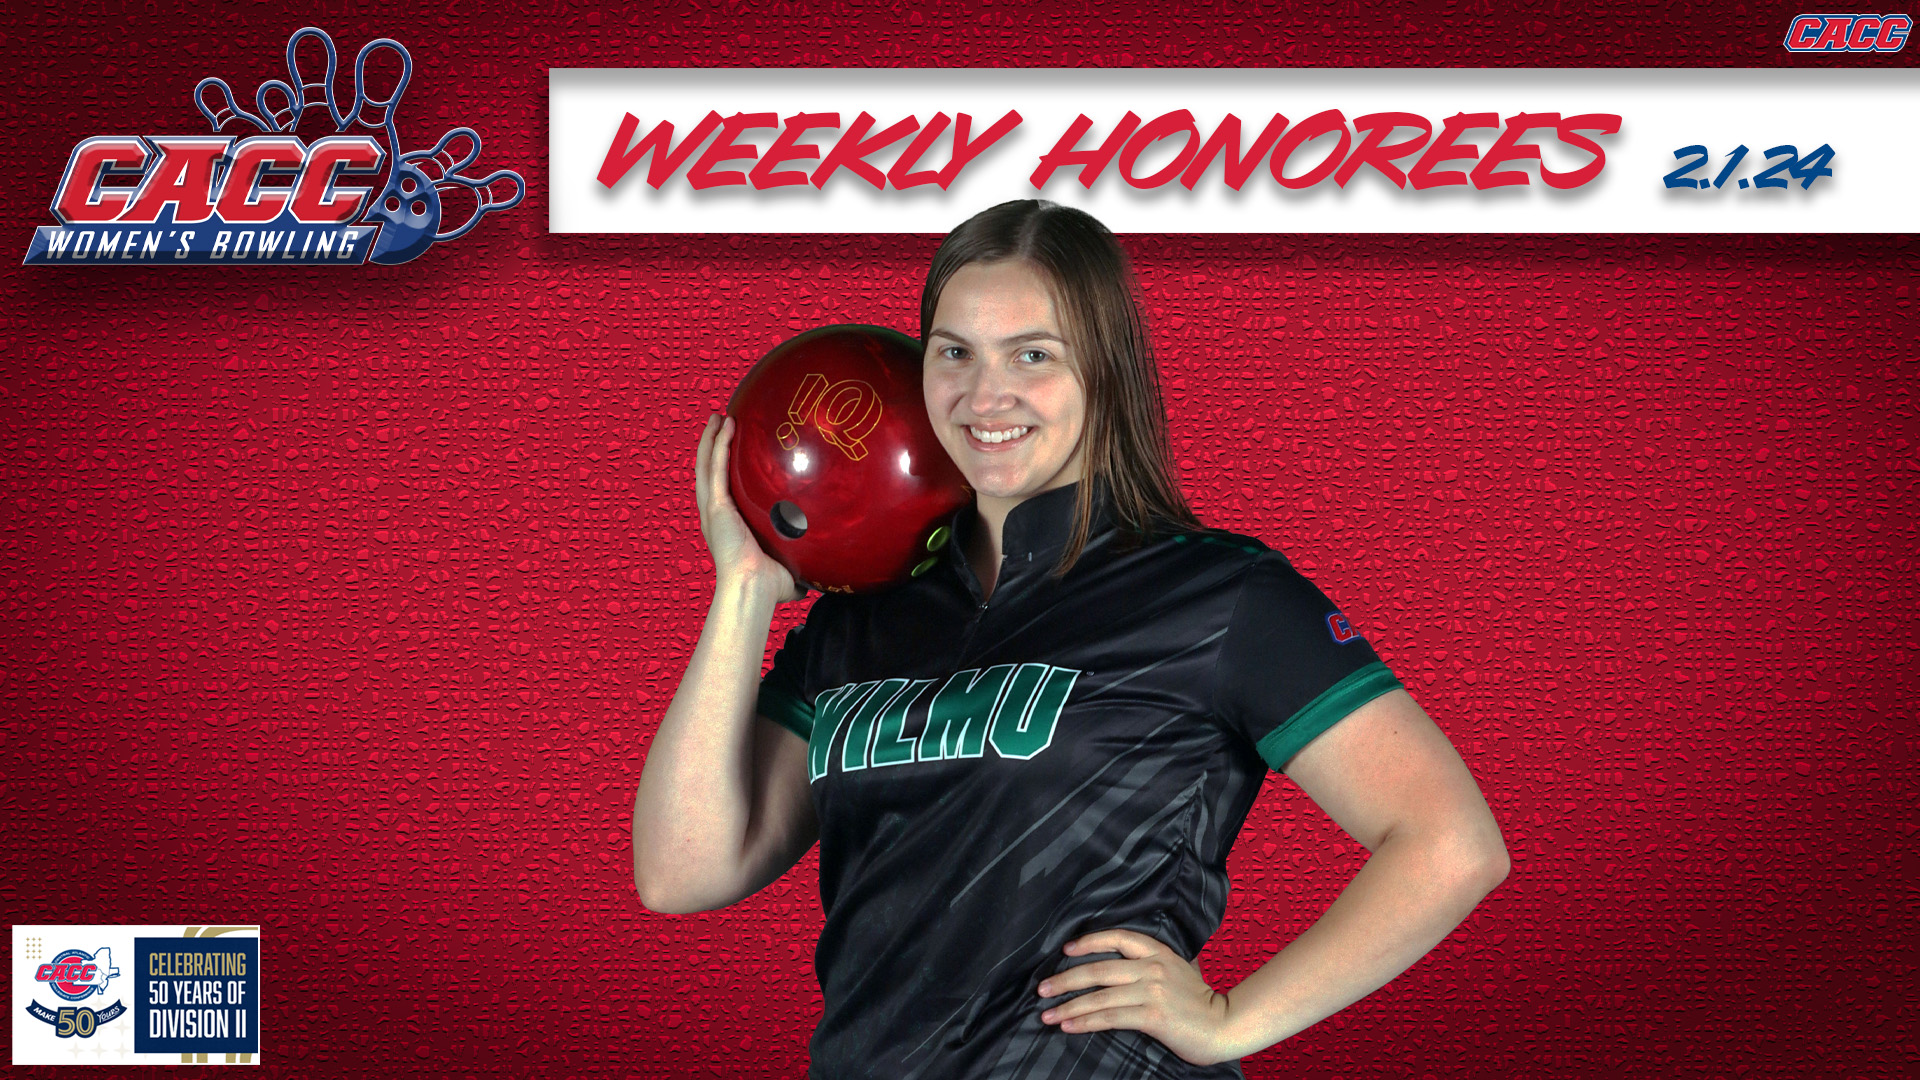 CACC Women's Bowling Weekly Honorees (2-1-24)